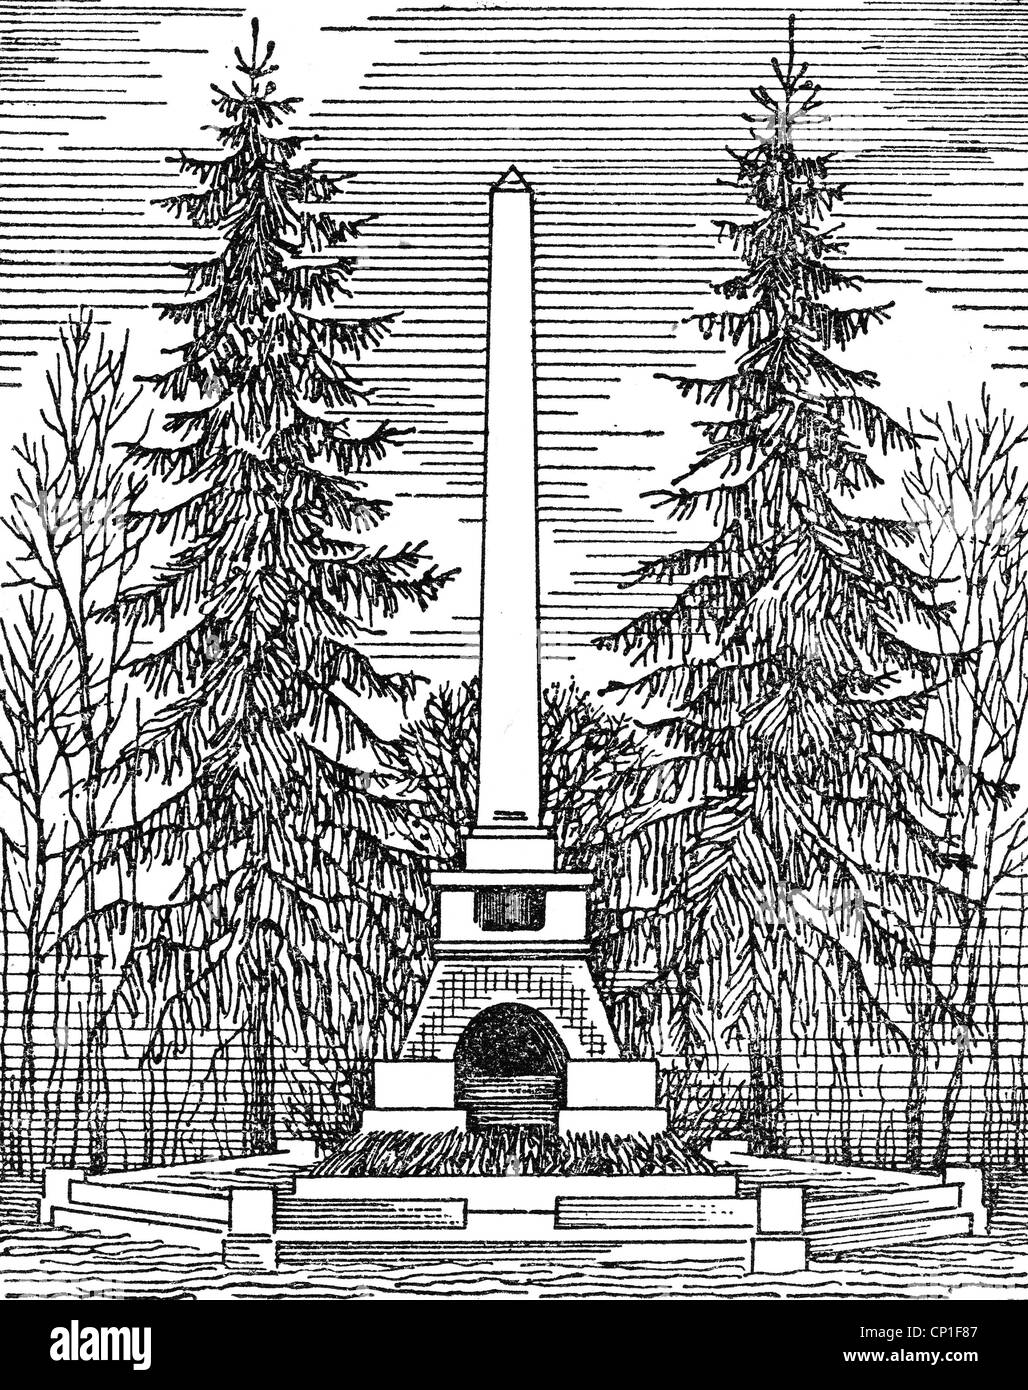 Tsiolkovskii, Konstantin Eduardovich, 17.9.1857 - 19.9.1935, Russian physicist, mathematician, pioneer of the astronautic theory, monument on his grave at Kaluga, Russia, wood engraving, Stock Photo